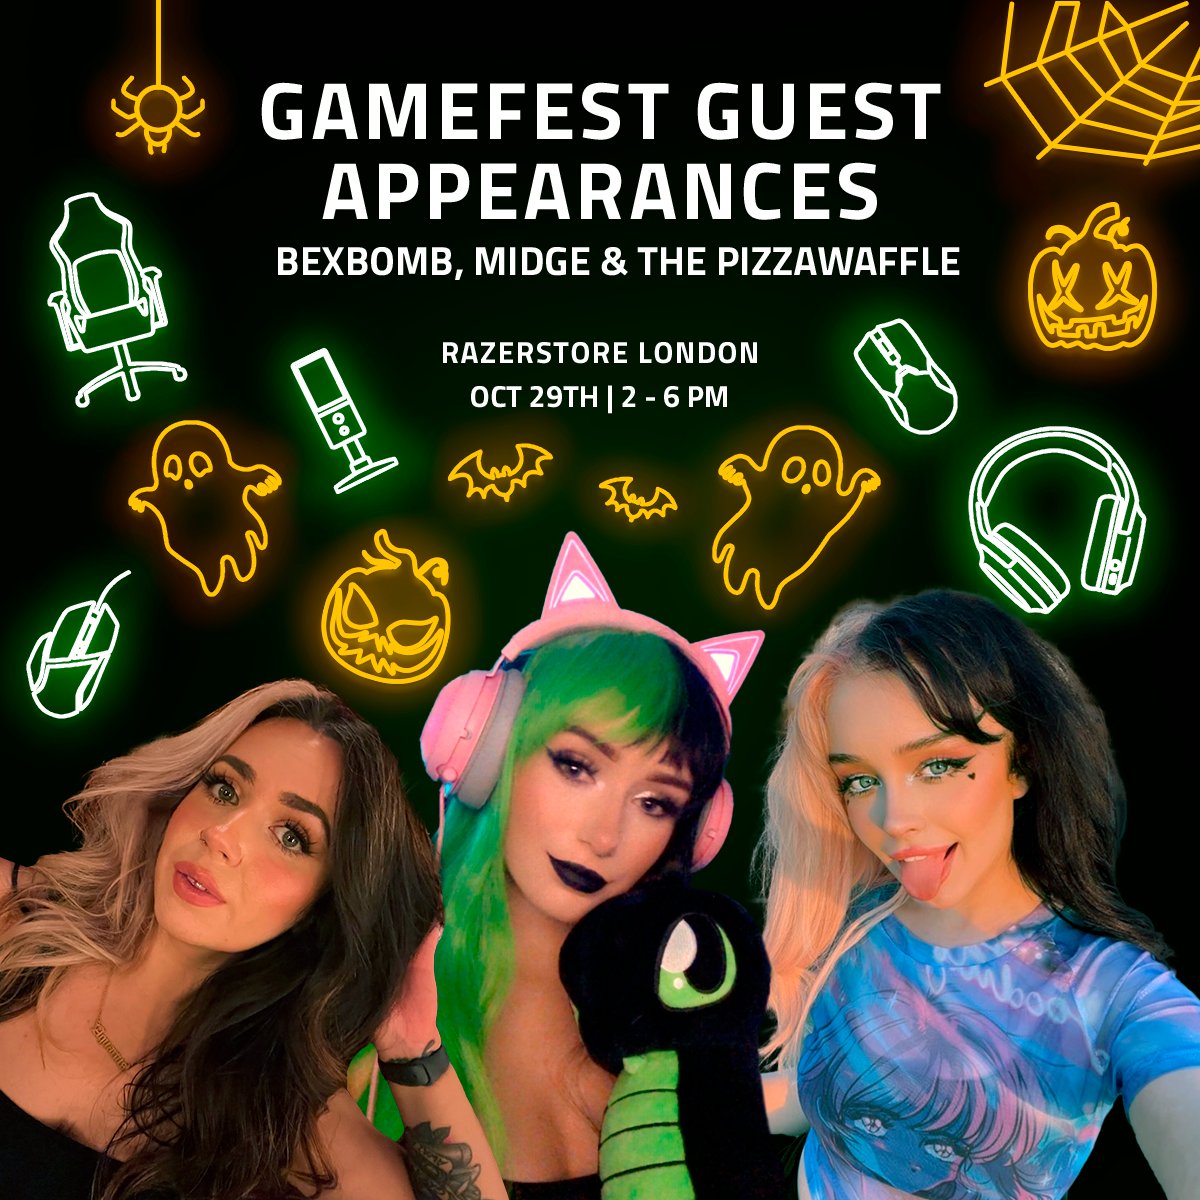 Meet our special guests!🌟 We'd like to introduce some INCREDIBLE creators attending our London #RazerStoreGameFest! 👤@bex_bomb 👤@midgegee 👤@thepizzawaffle Make sure you get down to meet some amazing creators and a fun-filled day of gaming! Sign up rzr.to/GameFestLondon…